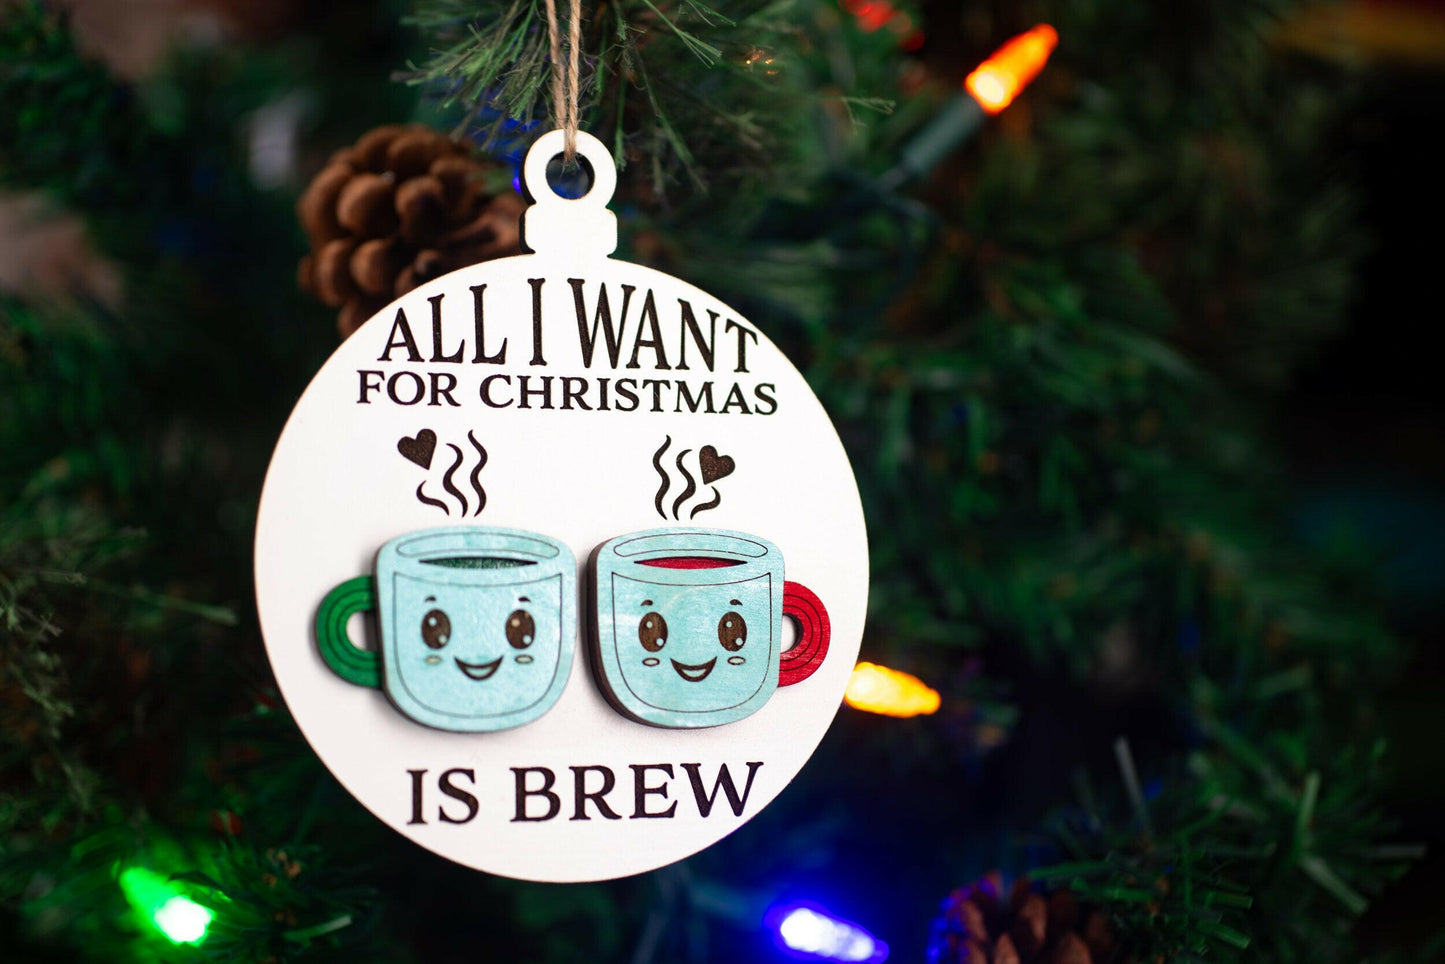 Tea Collection Christmas Ornaments SVG, PNG